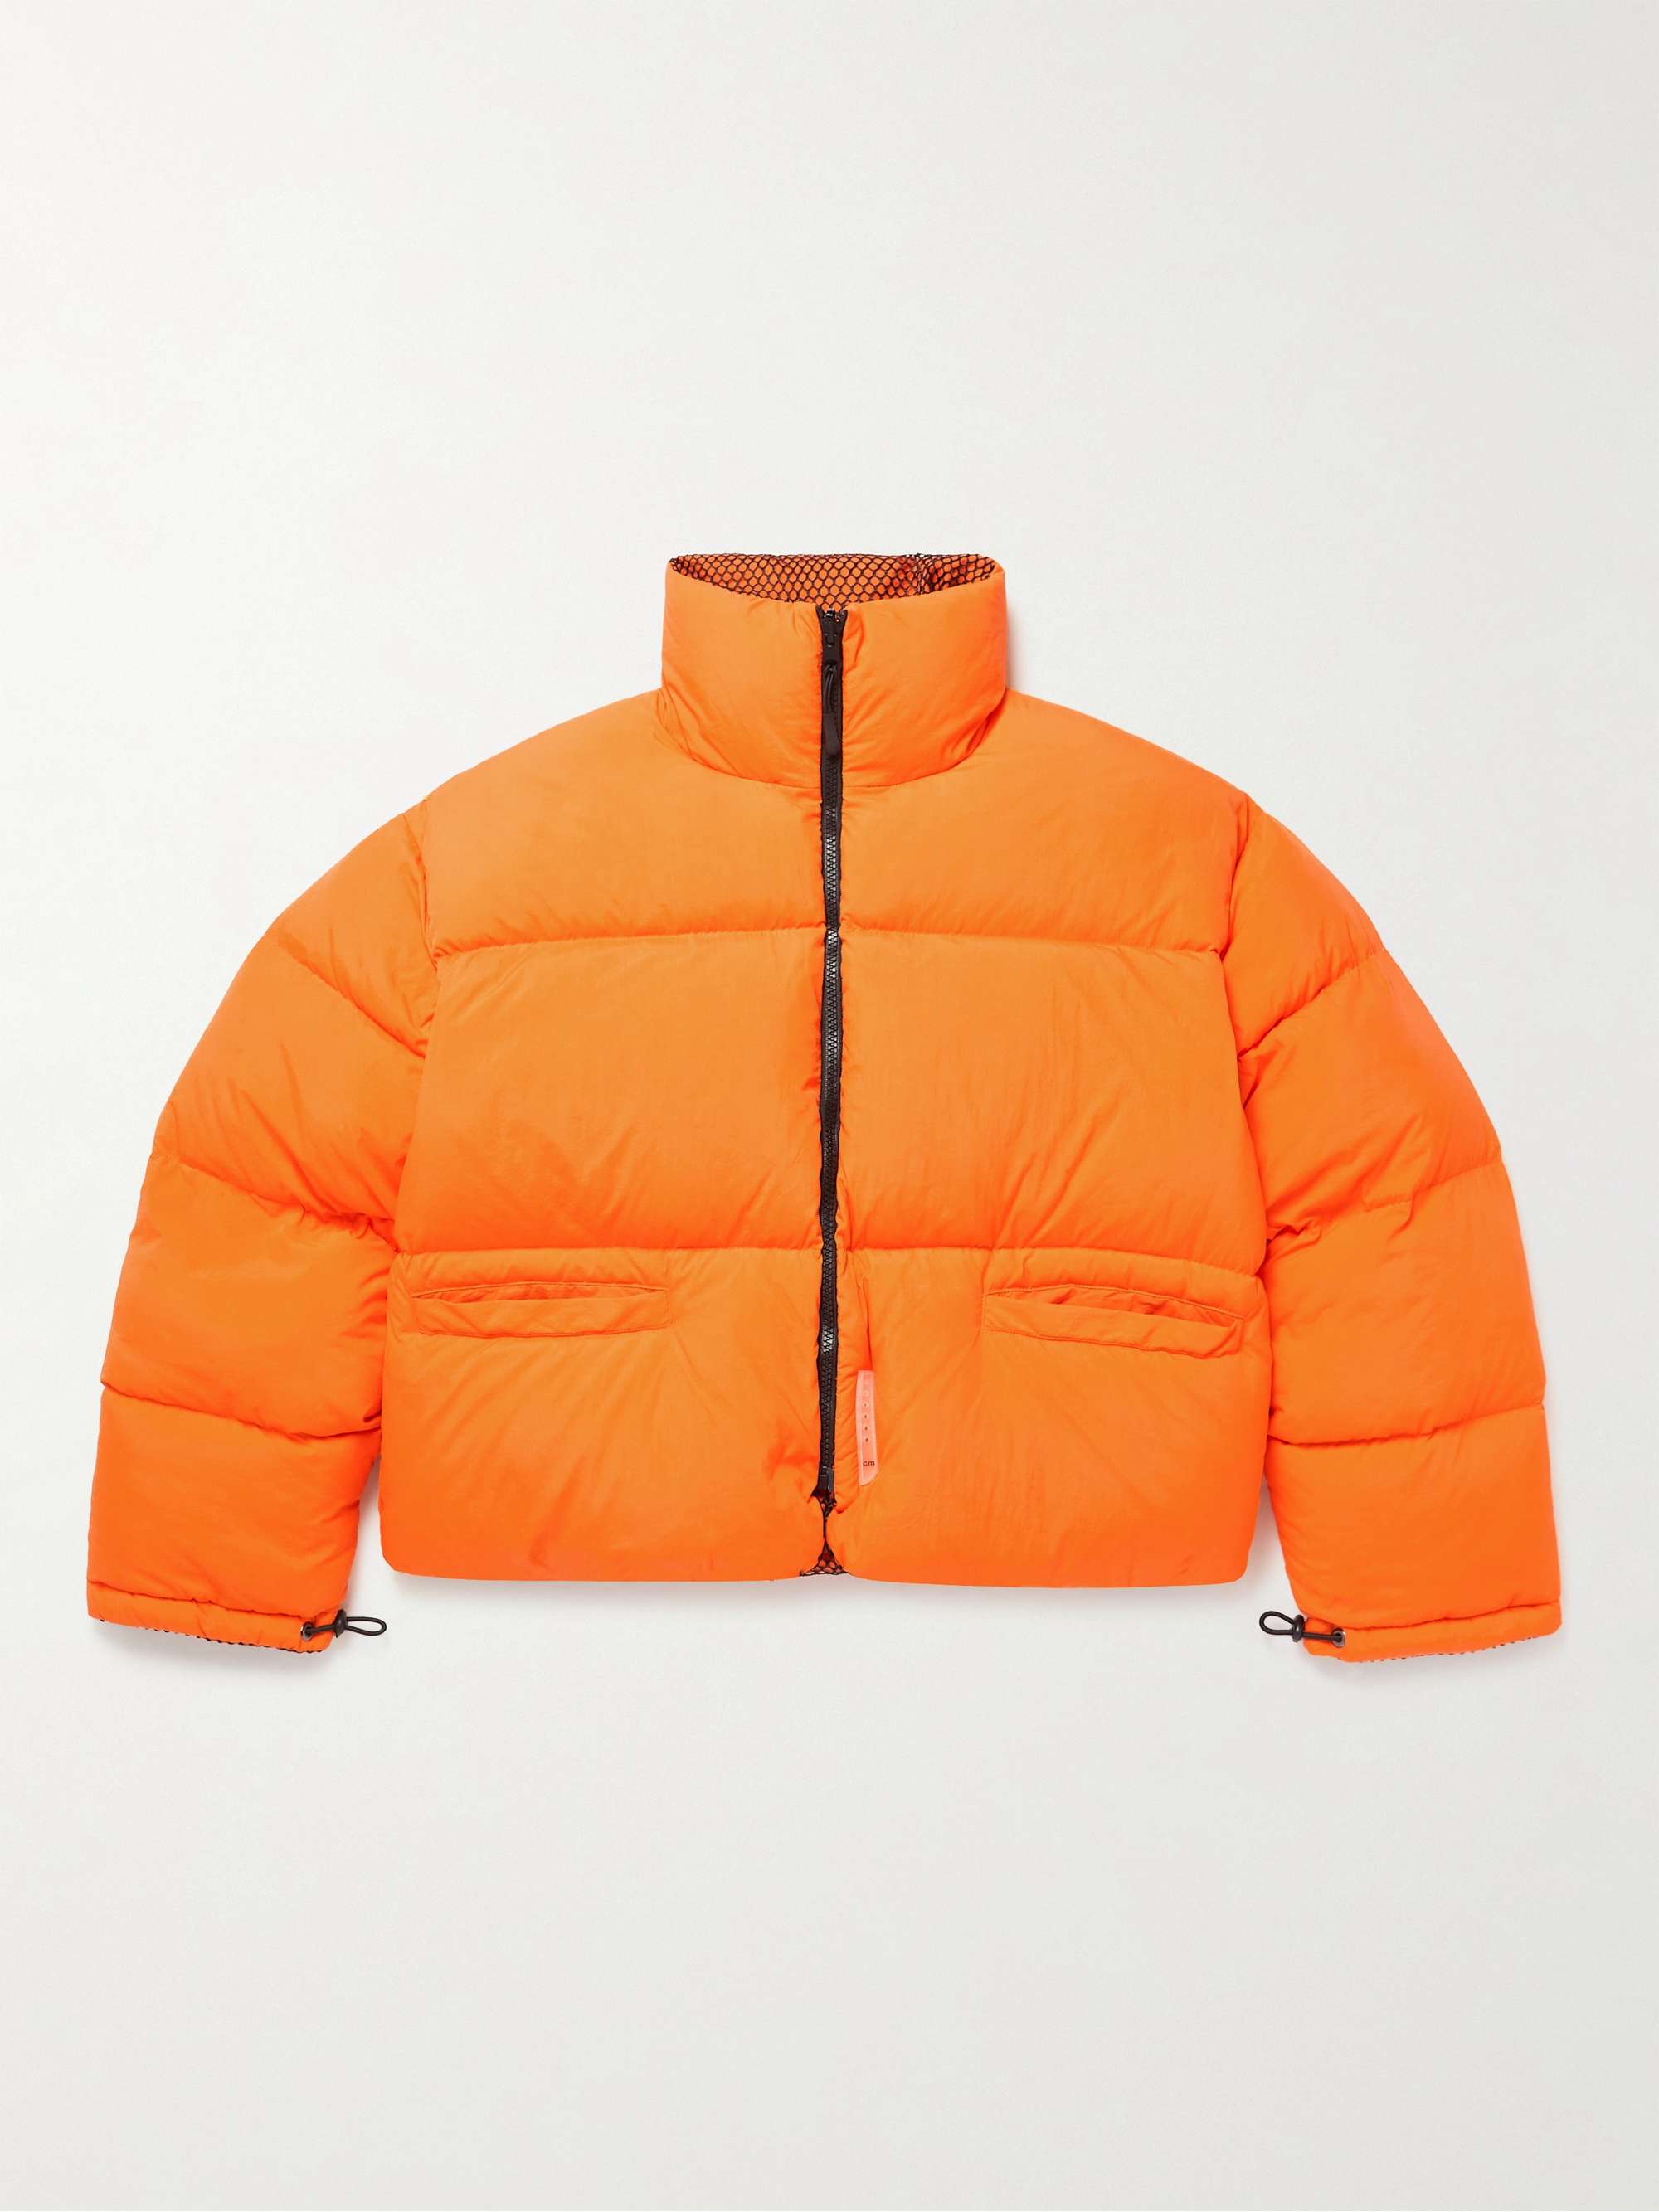 CONNOR MCKNIGHT + Throwing Fits Reversible Quilted Recycled Shell and Mesh Down Jacket